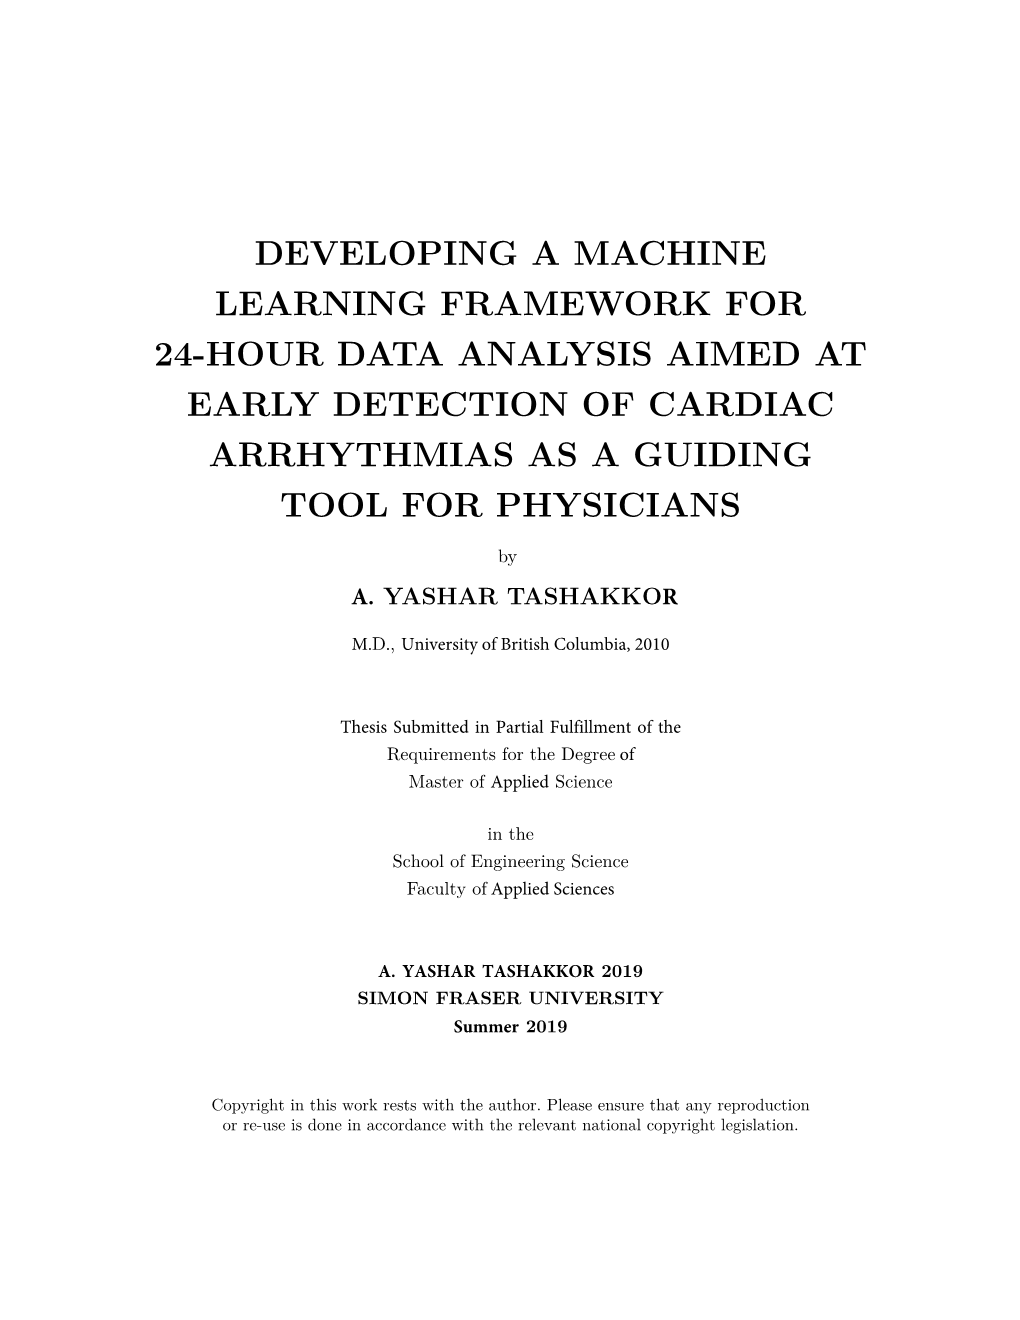 Developing a Machine Learning Framework for 24-Hour Data Analysis Aimed at Early Detection of Cardiac Arrhythmias As a Guiding Tool for Physicians